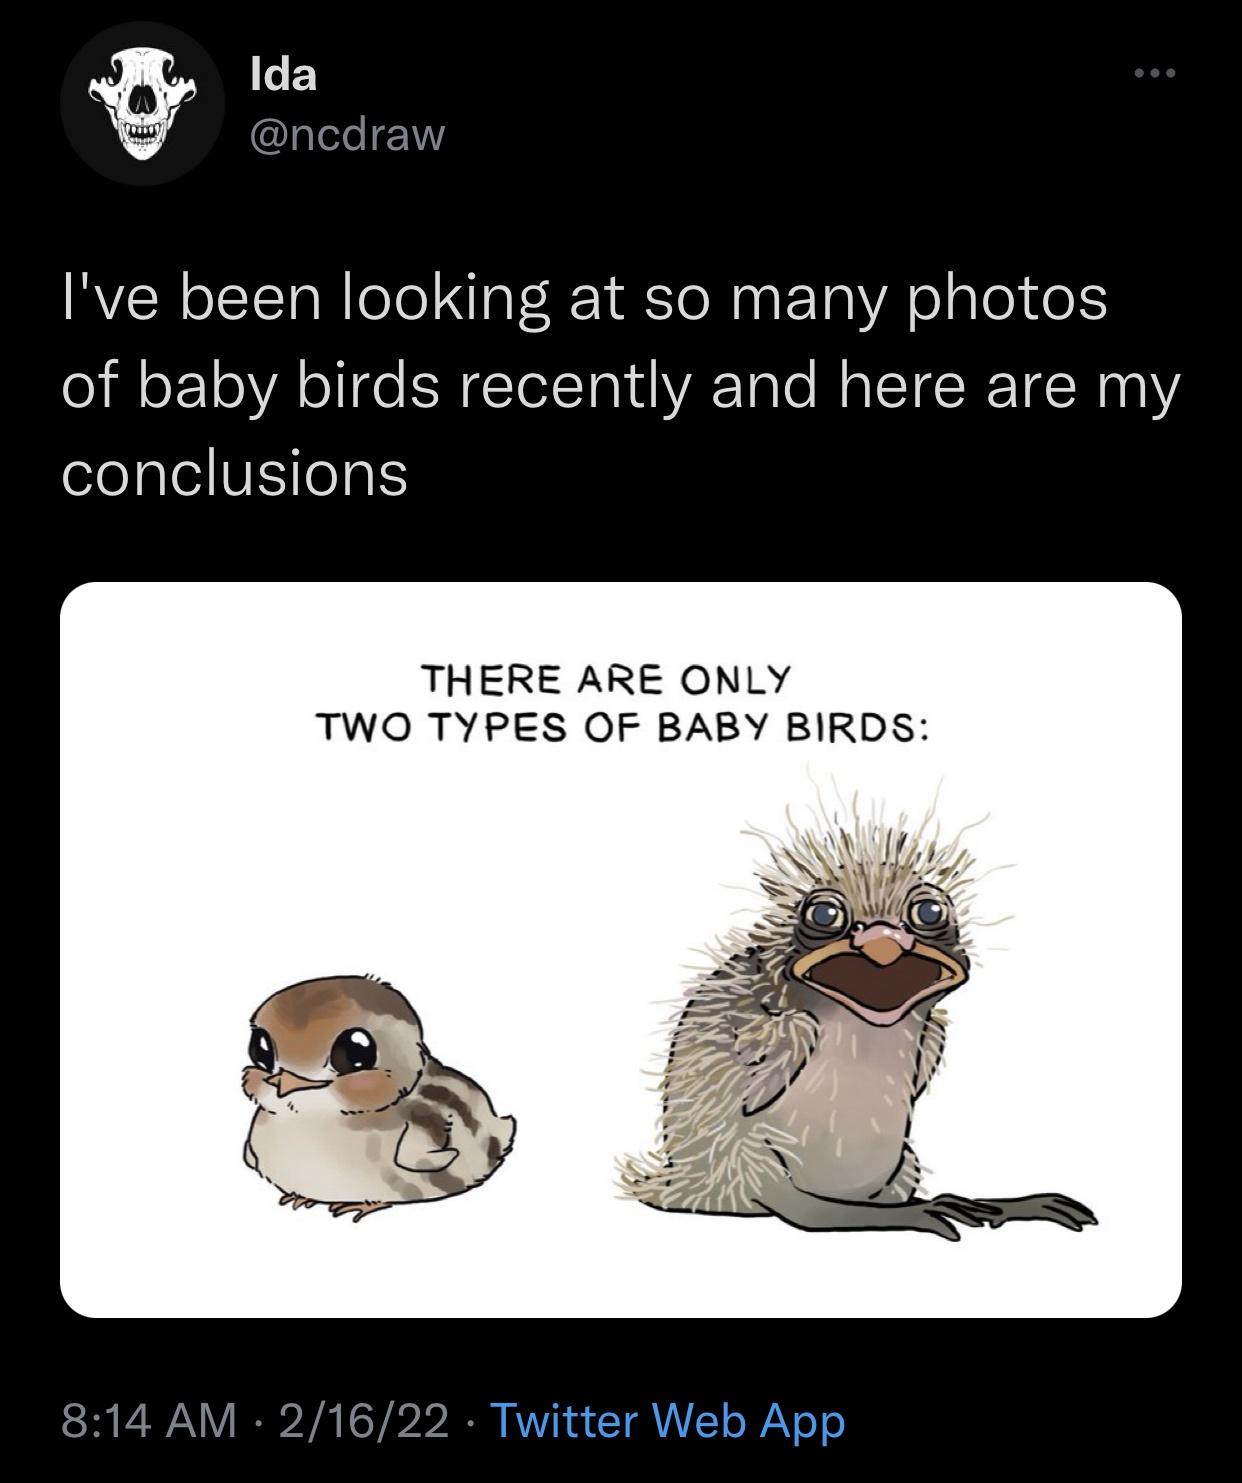 funny memes - fresh memes - fauna - Ida img I've been looking at so many photos of baby birds recently and here are my conclusions There Are Only Two Types Of Baby Birds 21622 Twitter Web App